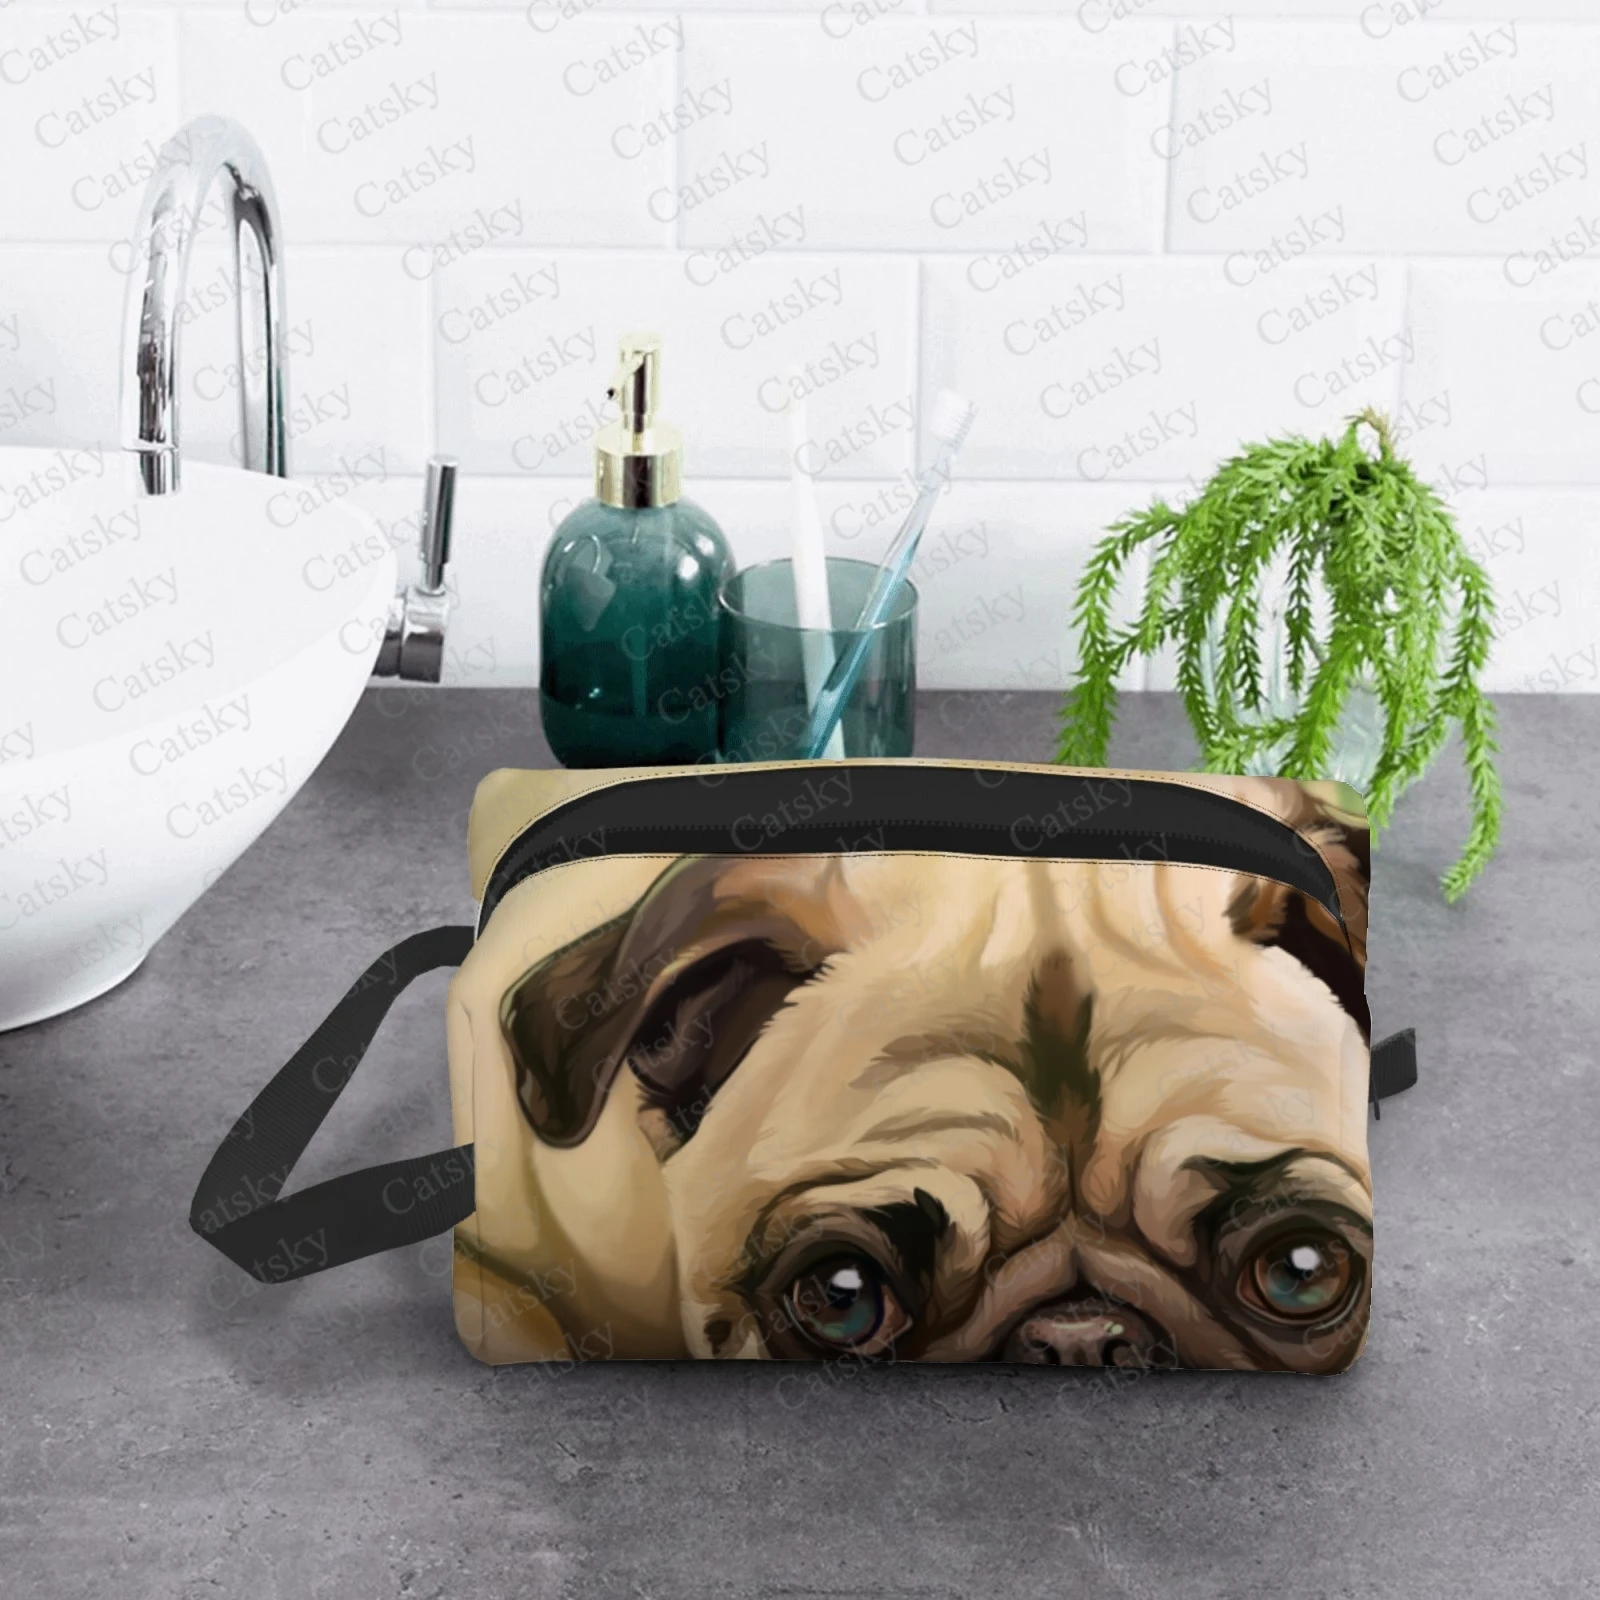 french bulldog cartoon Cosmetic Bag Ladies Fashion Large Capacity Cosmetic Box Beauty Storage Wash Cosmetic Bag 2021 new simple cosmetic storage bag clutch bag coin purse straw woven material large capacity portable travel wash bag